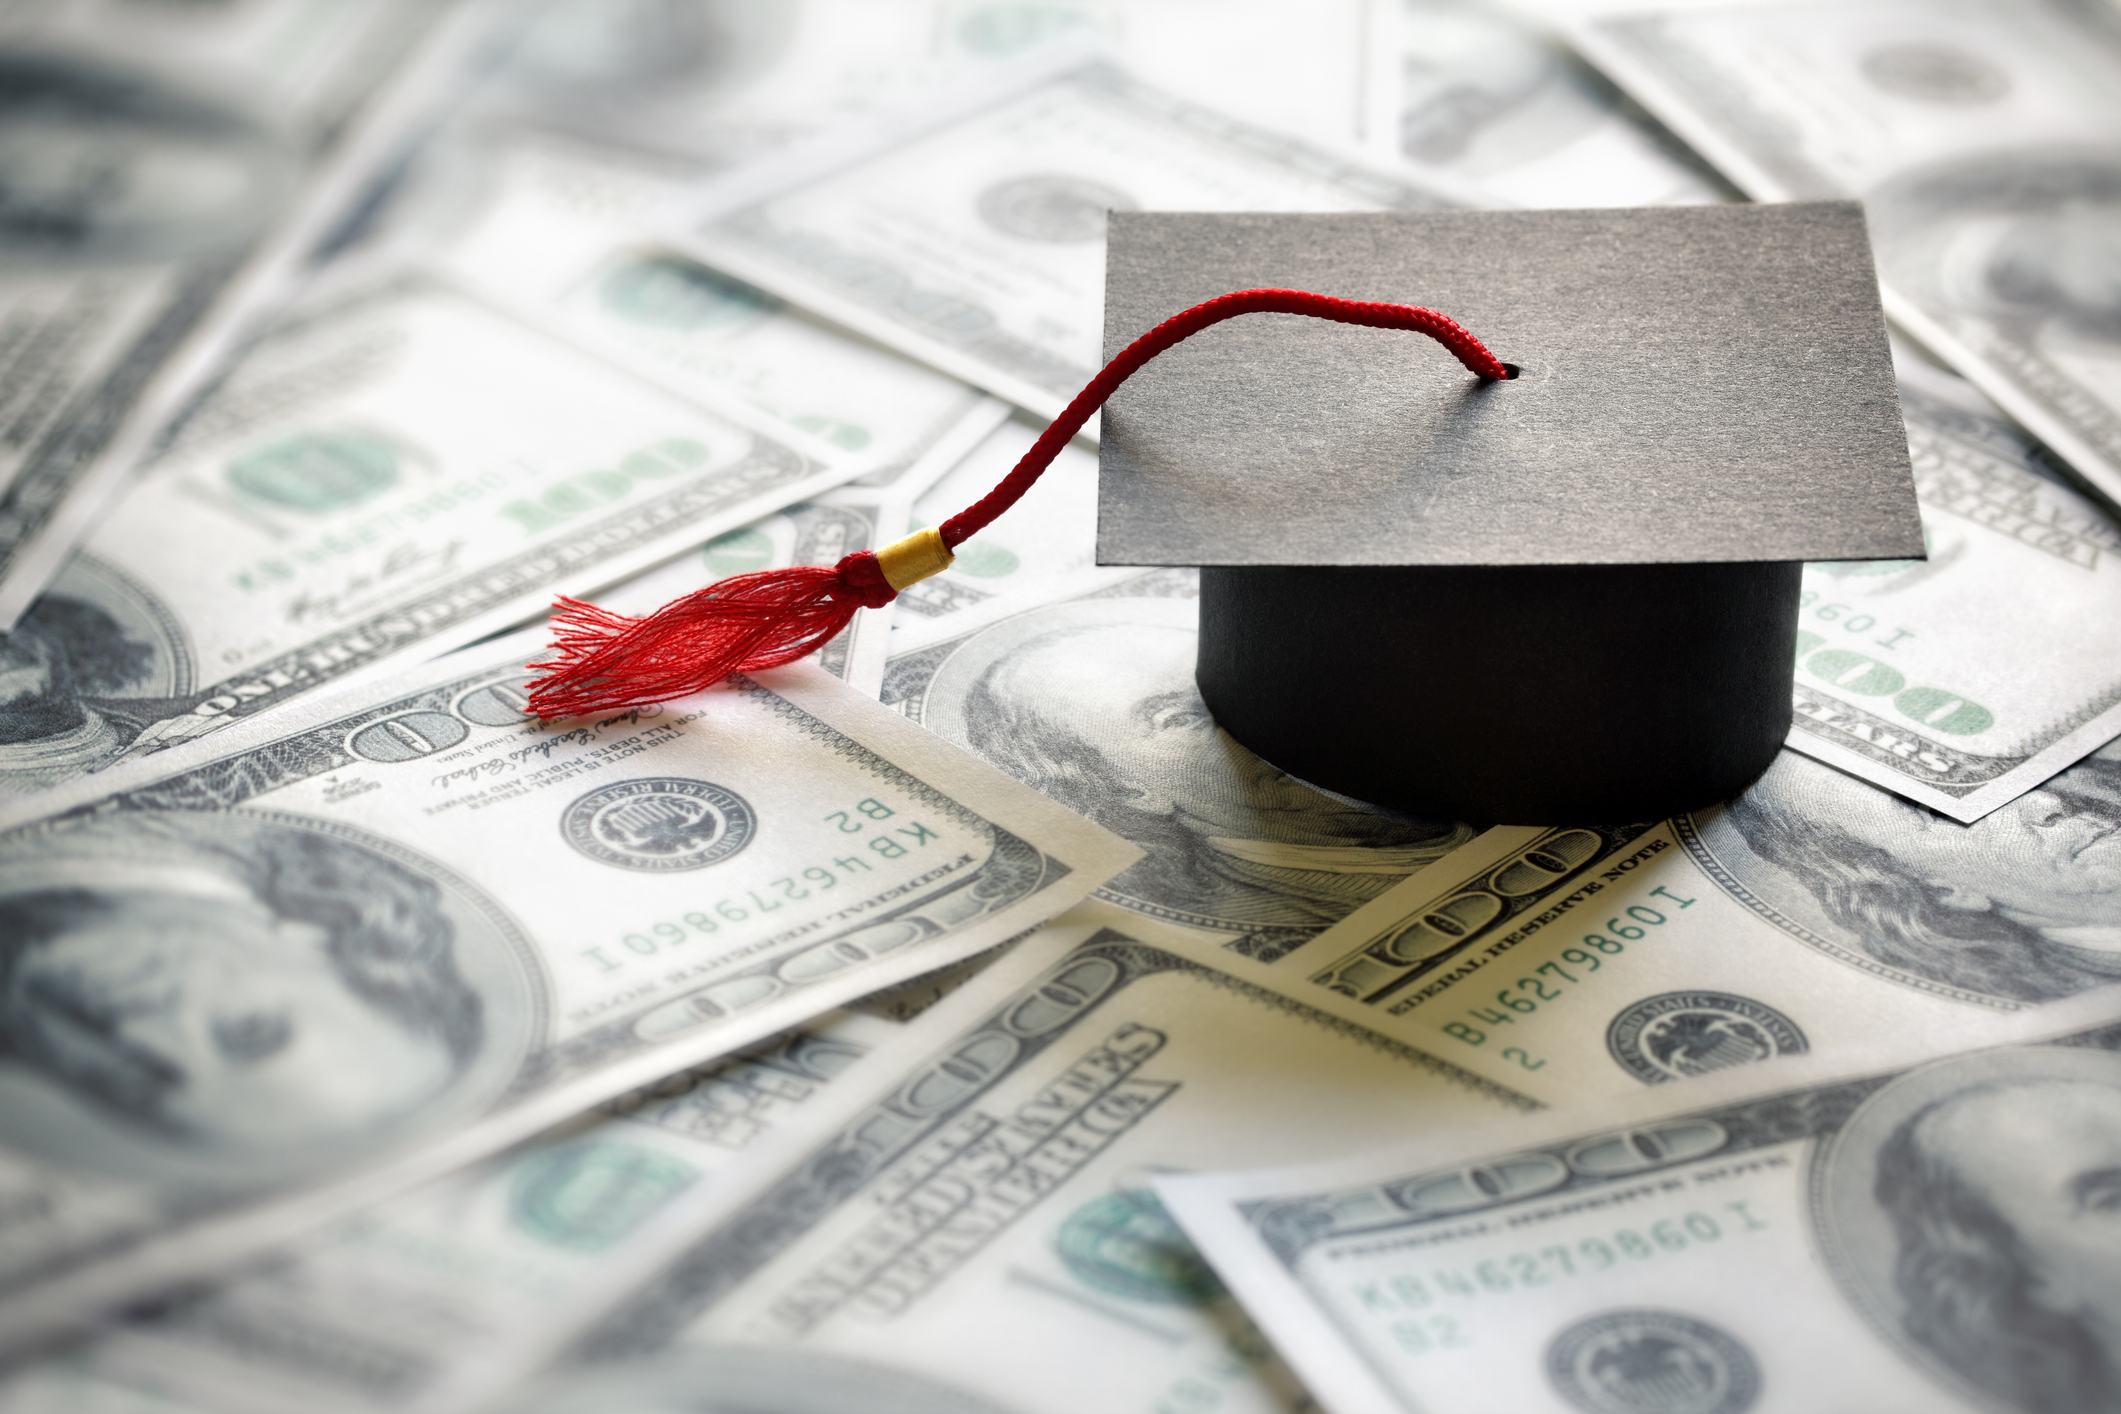 WHAT CAN I DO ABOUT STUDENT DEBT?